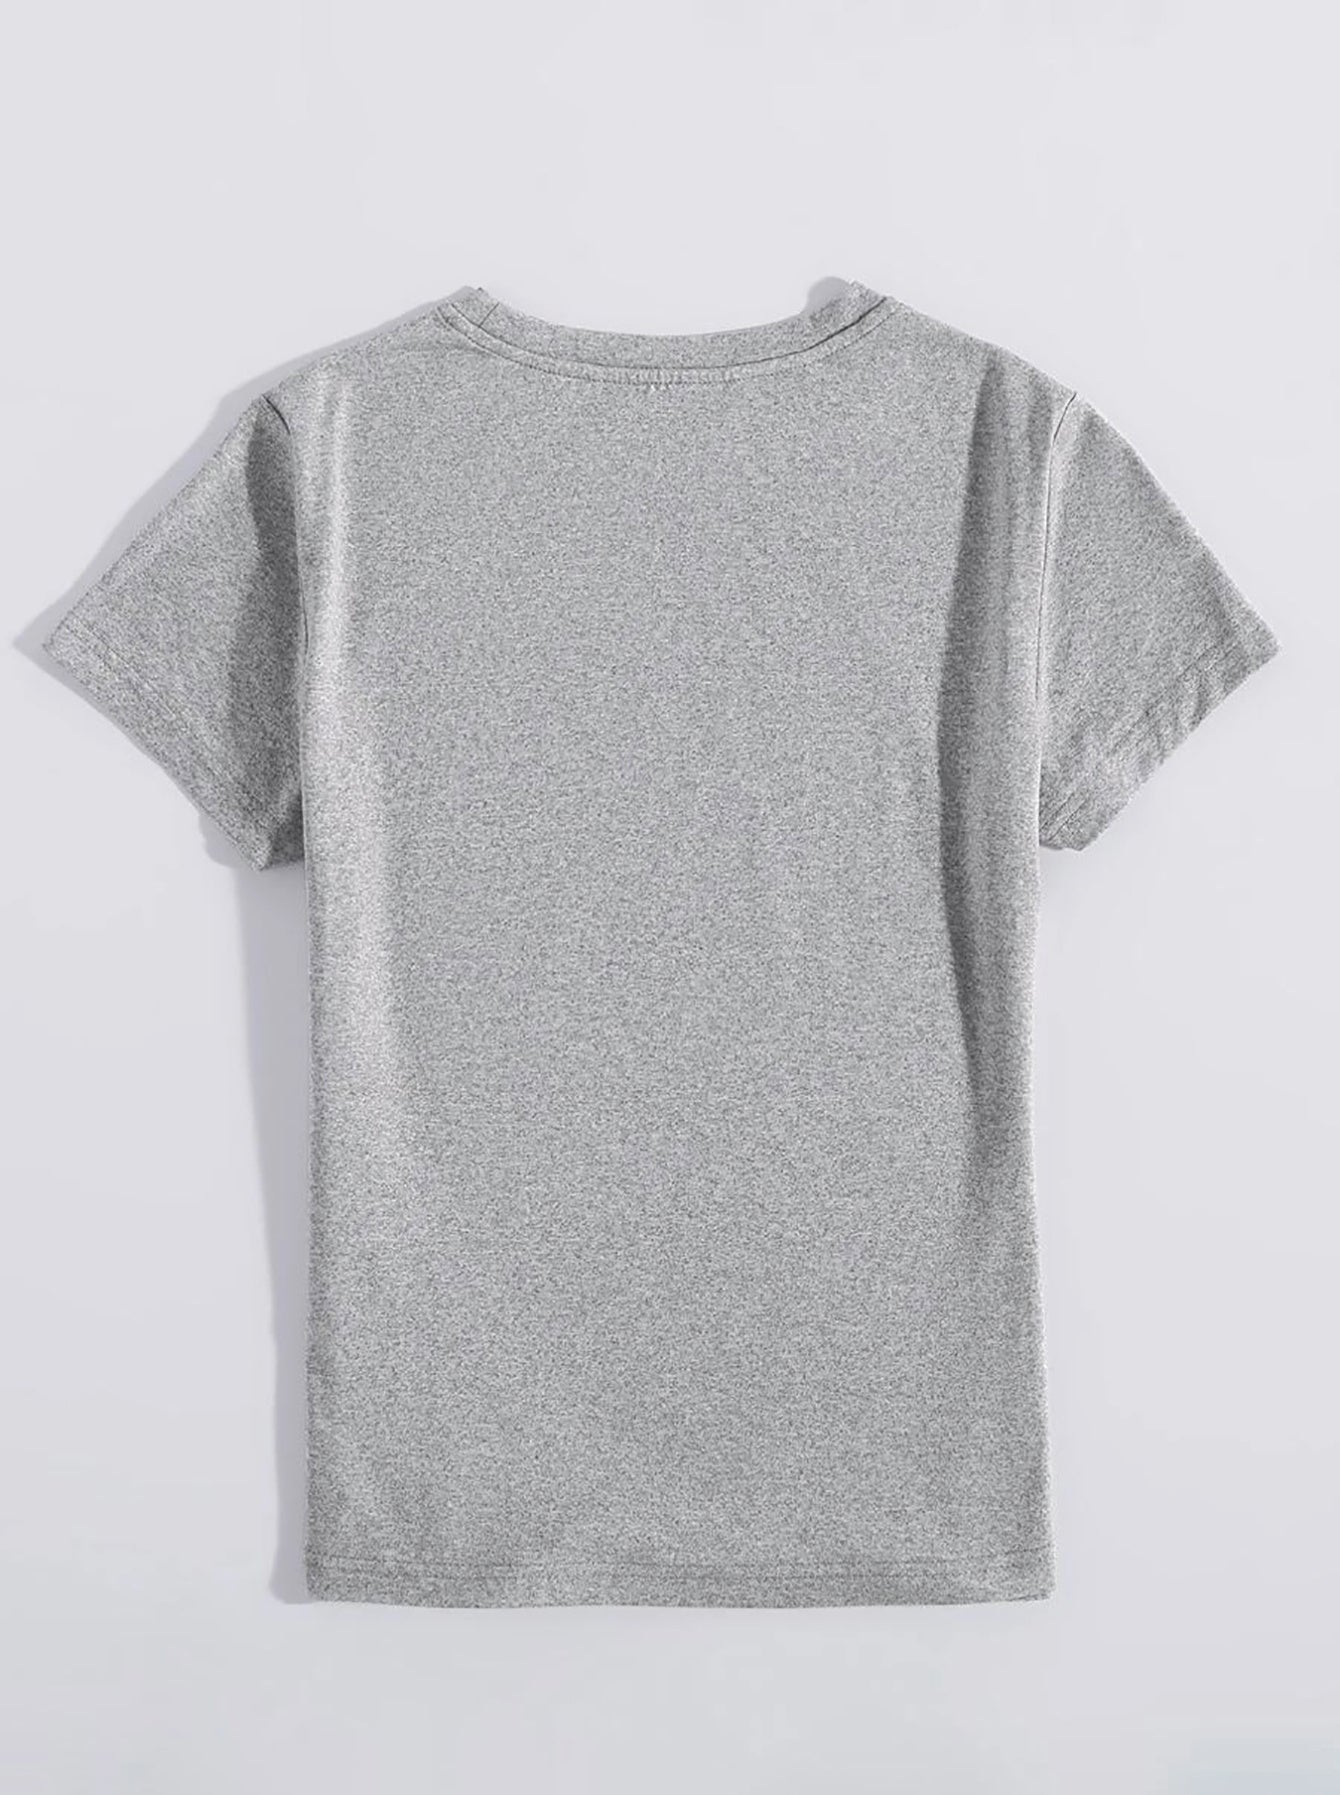 Graphic Round Neck Short Sleeve T-Shirt - Sybaritic Bags & Clothing